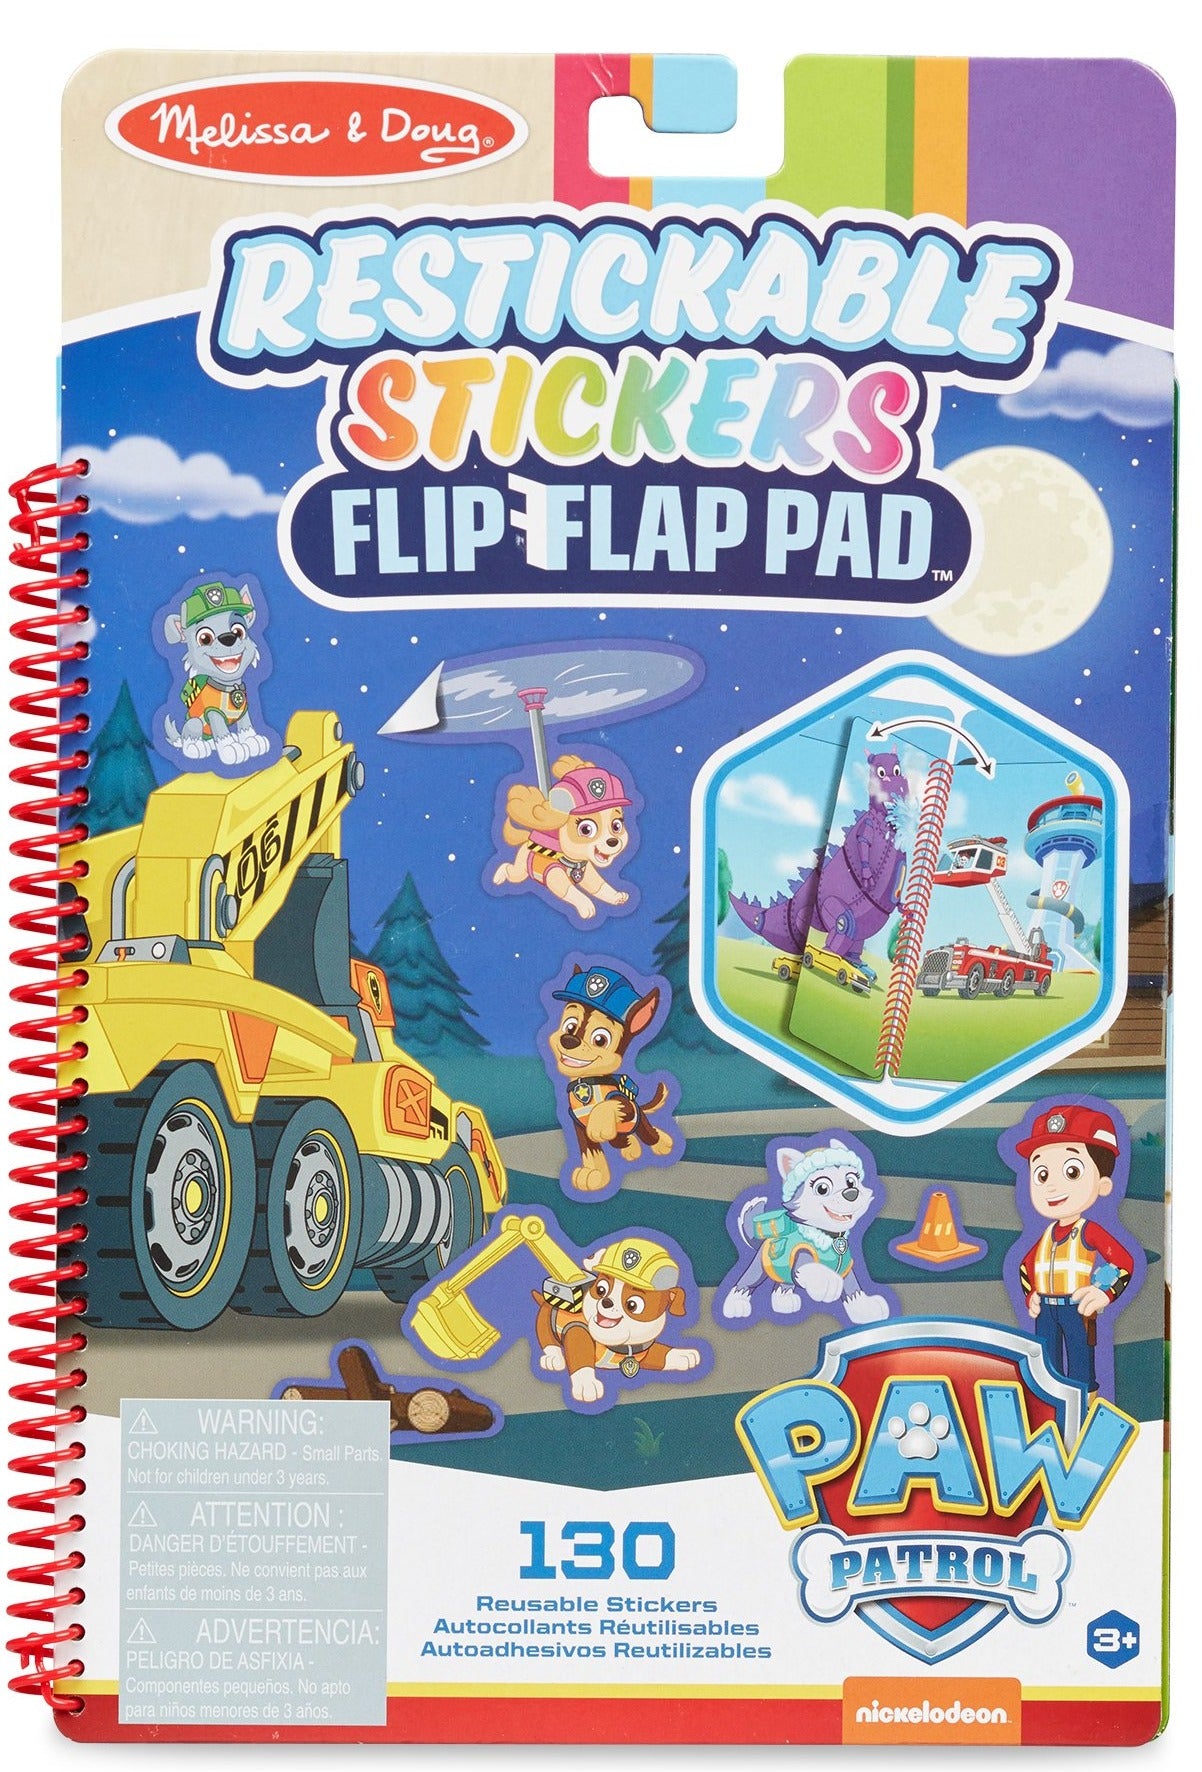 Paw Patrol Restickable Stickers Flip-Flap Pad - Ultimate Rescue – Hobby  Express Inc.